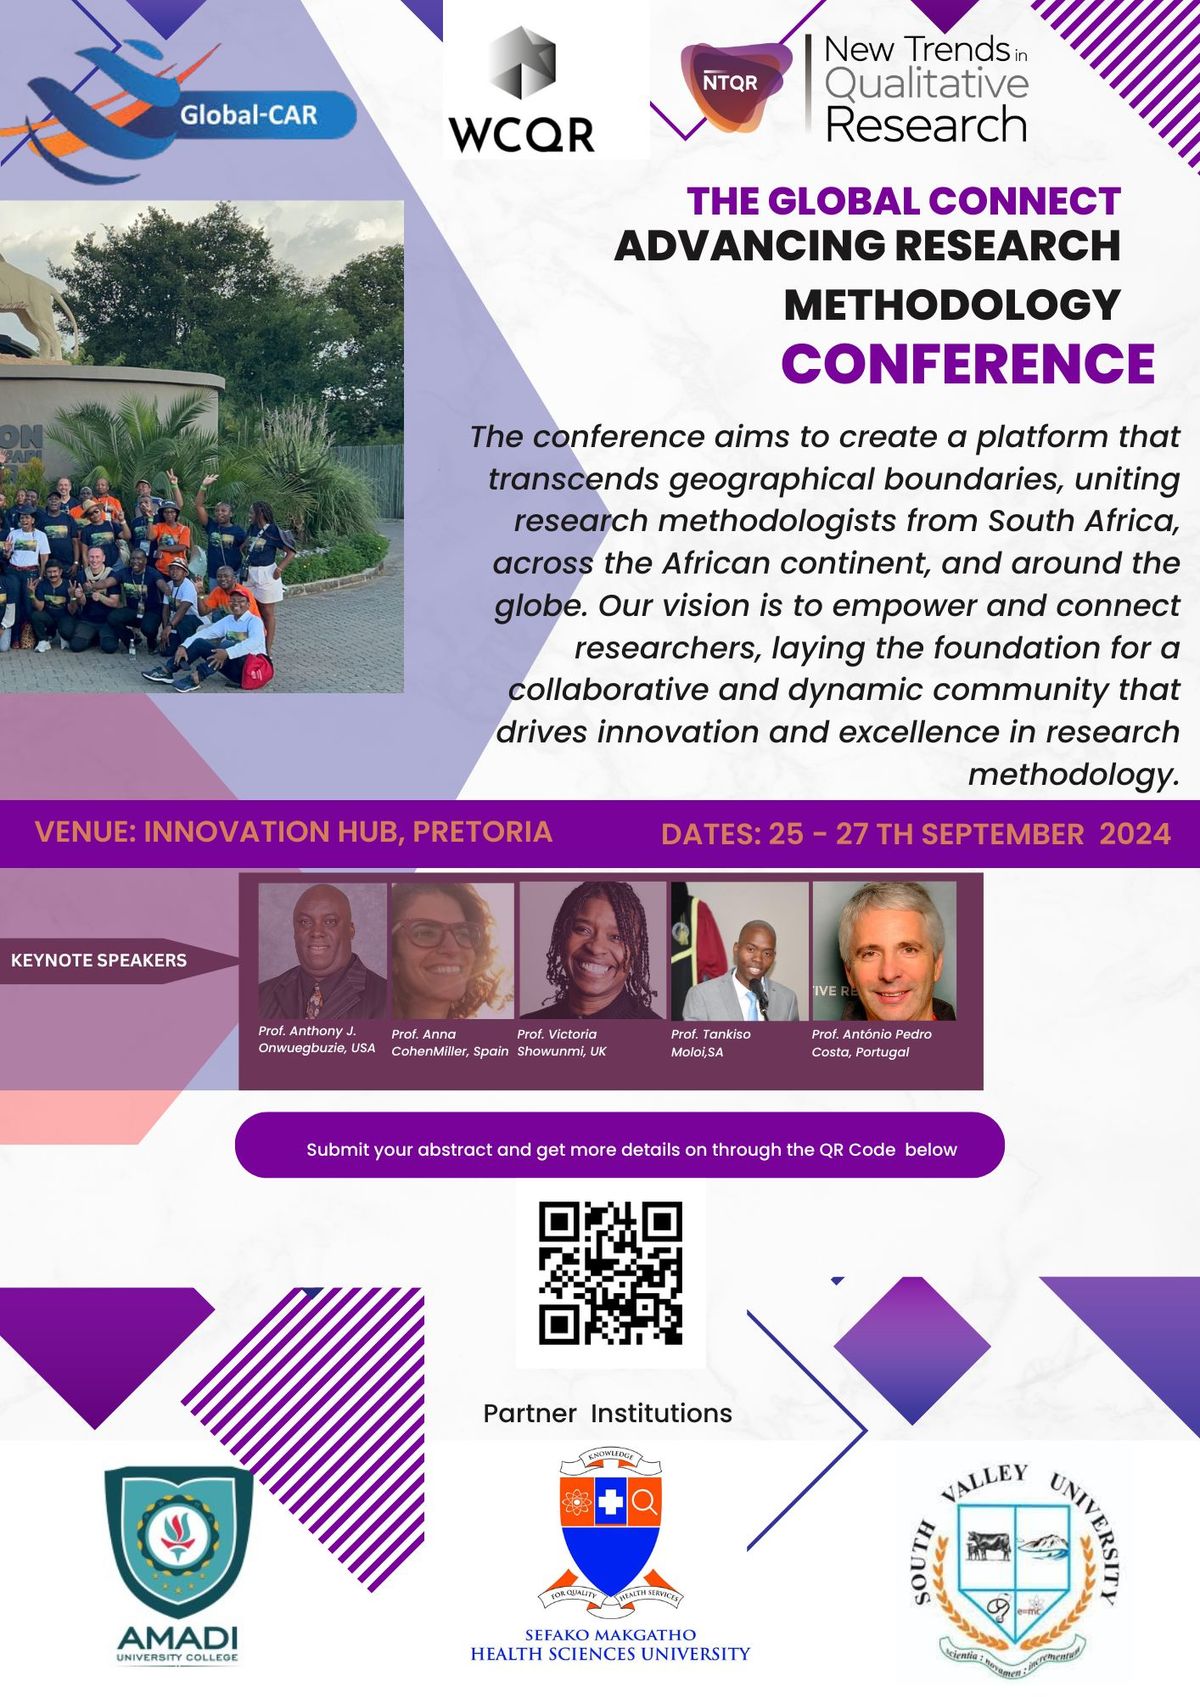 The Global Connect - Advancing Research Methodology Conference